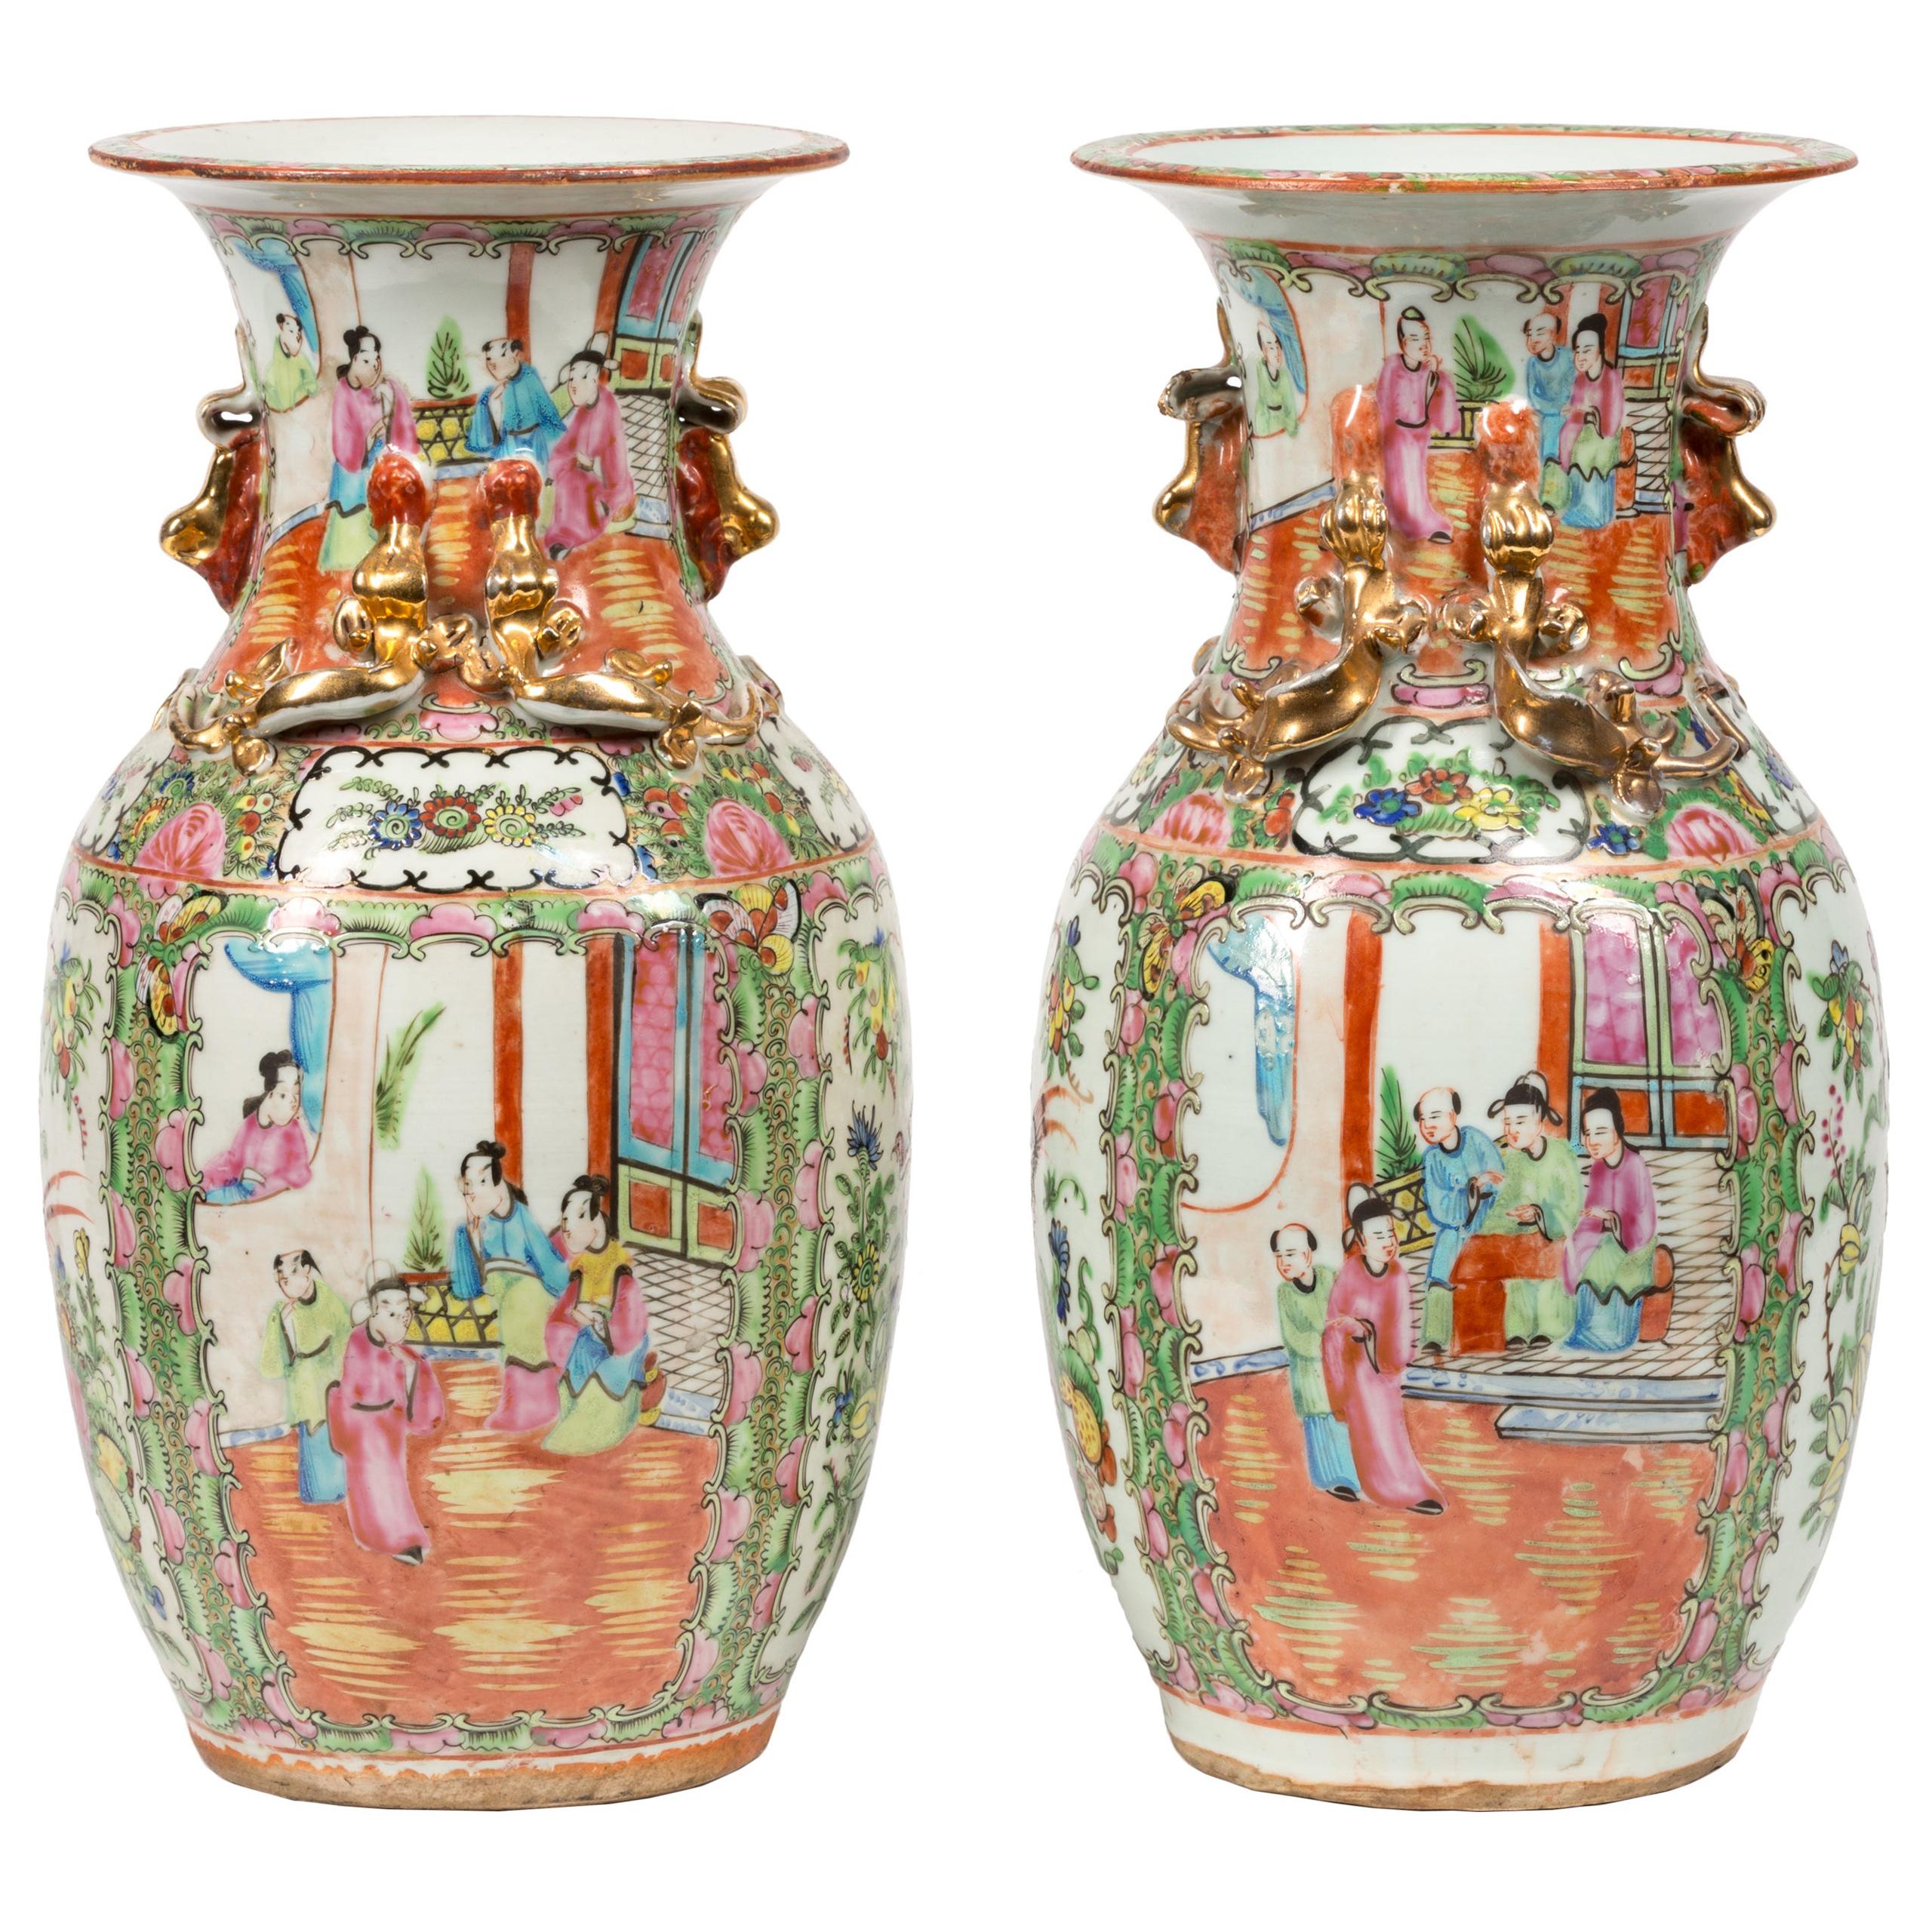 Pair of Late 19th Century Canton Chinese Urns in Famille Rose Style